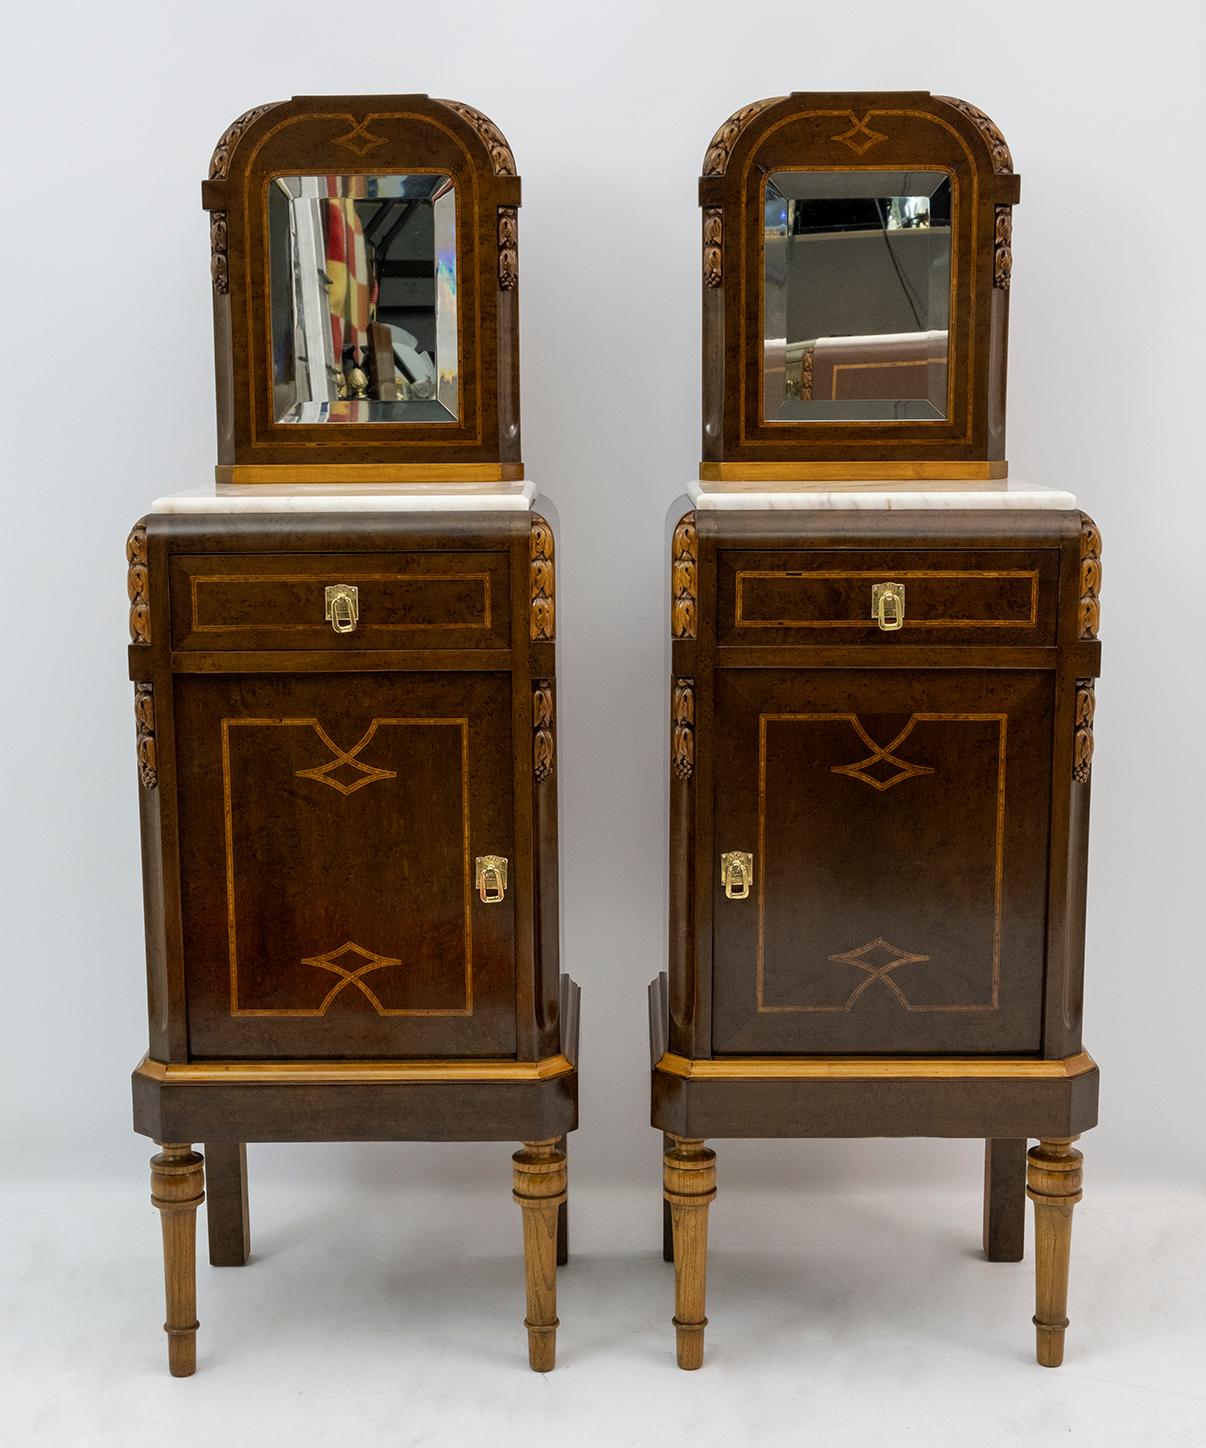 Pair of bedside tables in thuja briar, maple inlays and Portuguese pink marble top, 1920s Italian production. The bedside tables have been restored and polished with shellac.
The dresser is also available.
The bedside tables measure 126 cm high